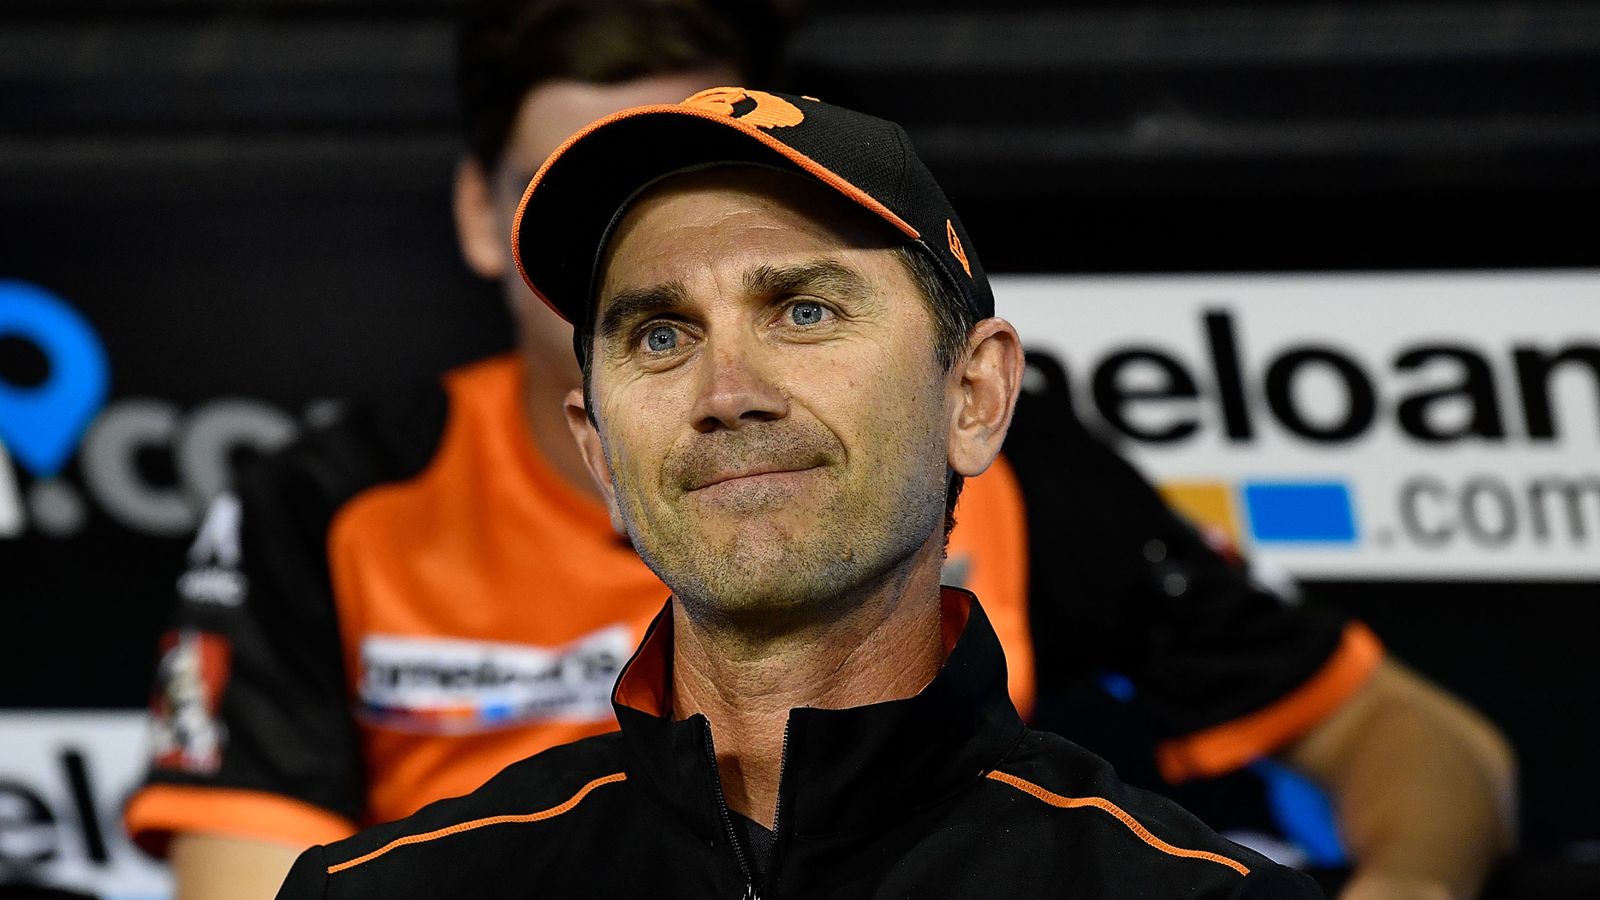 Cricket Australia appoint Justin Langer as new head coach Cricket